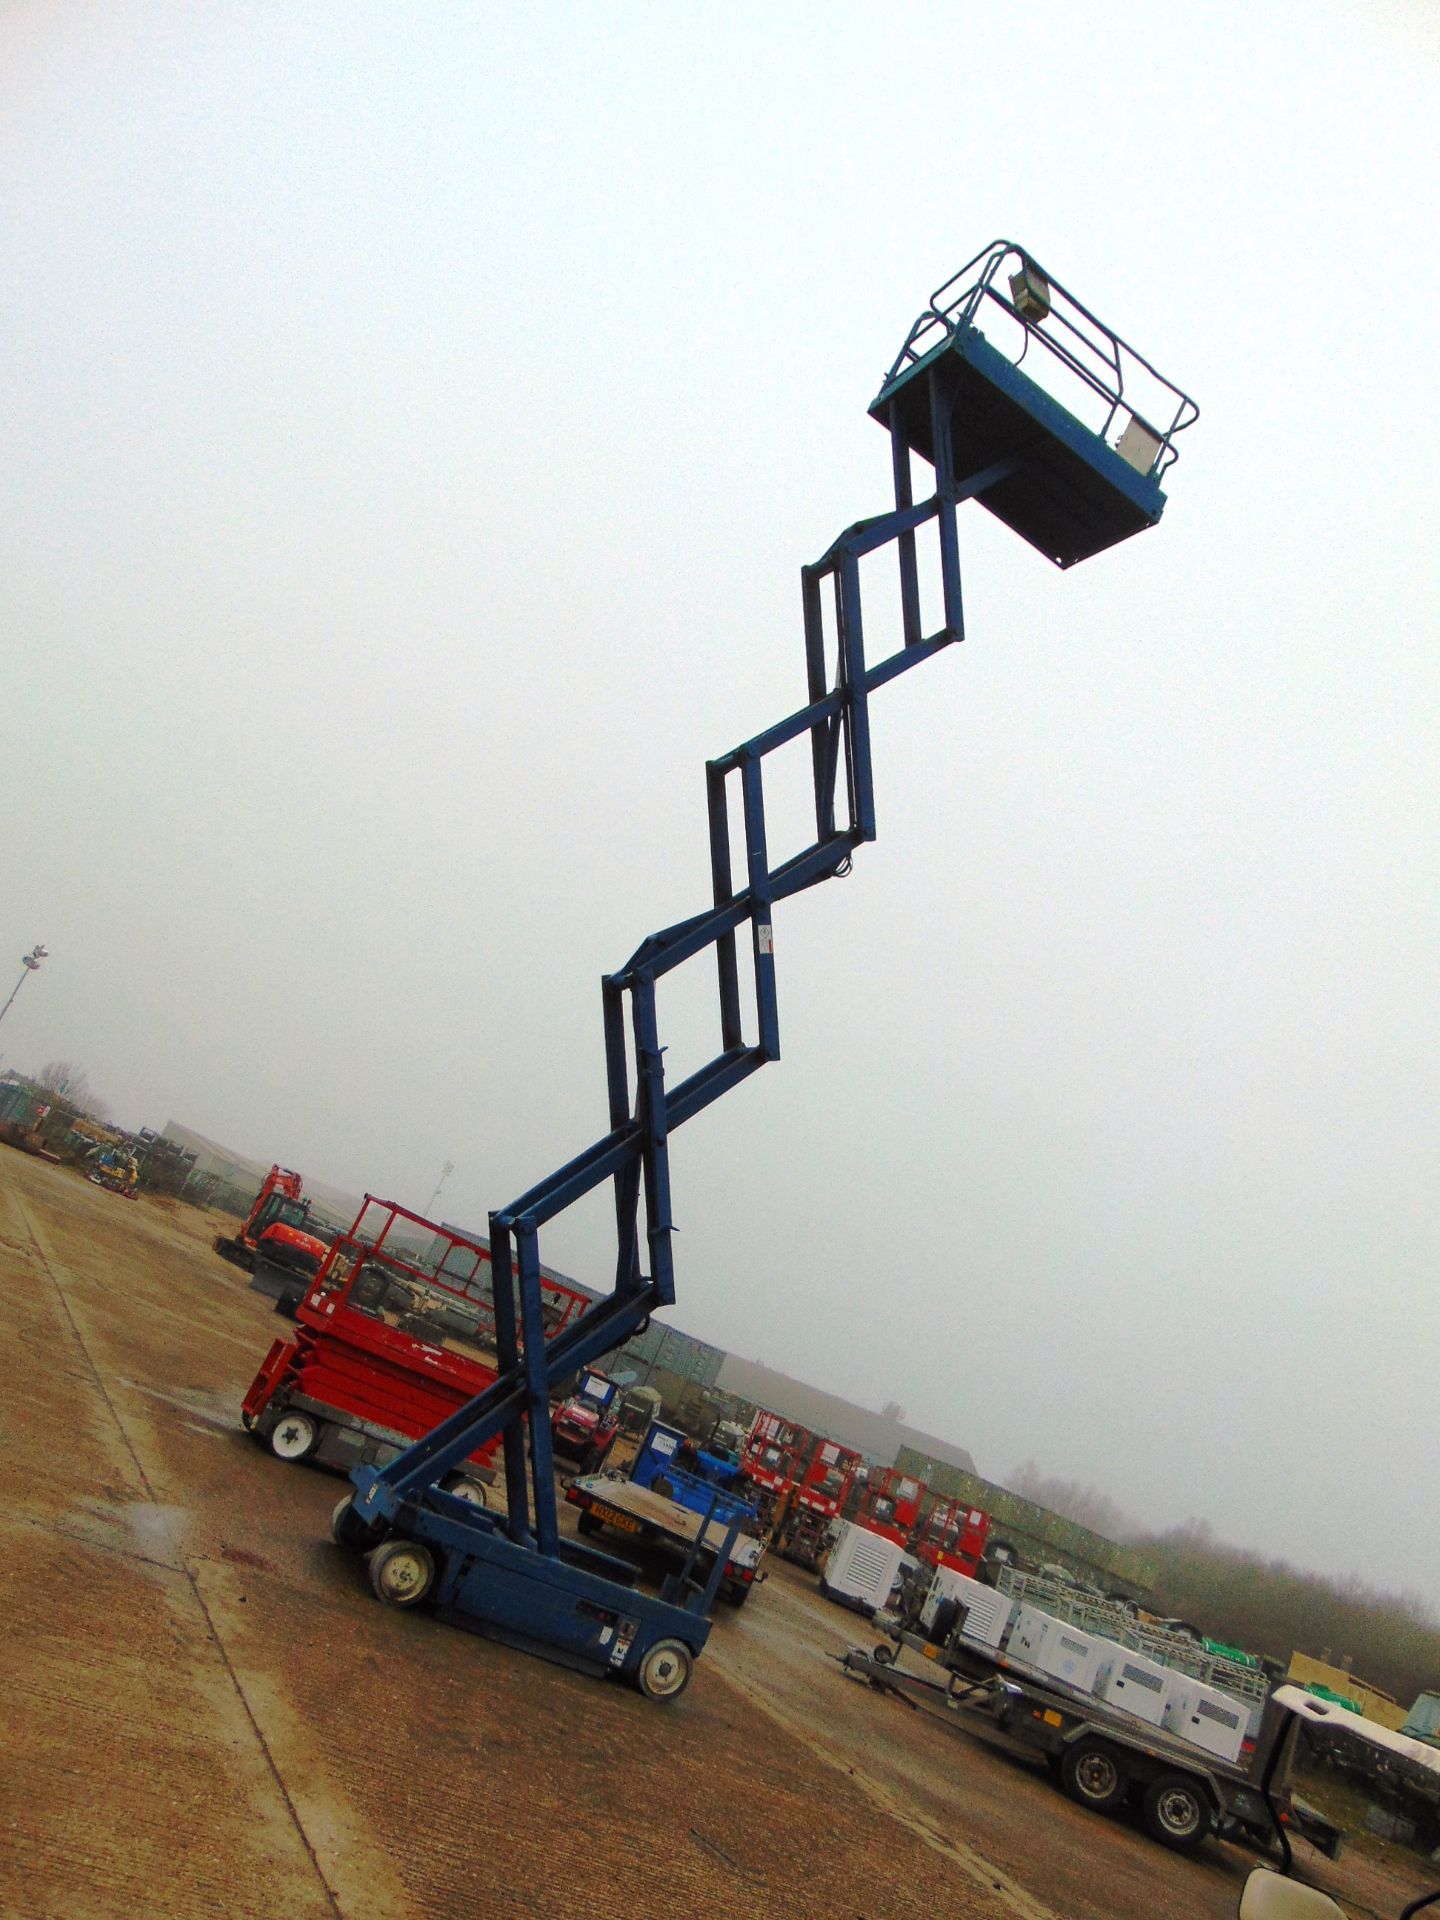 Powered Access Upright X32 11.8m Electric Scissor Lift ONLY 1,326 HOURS! - Image 3 of 18